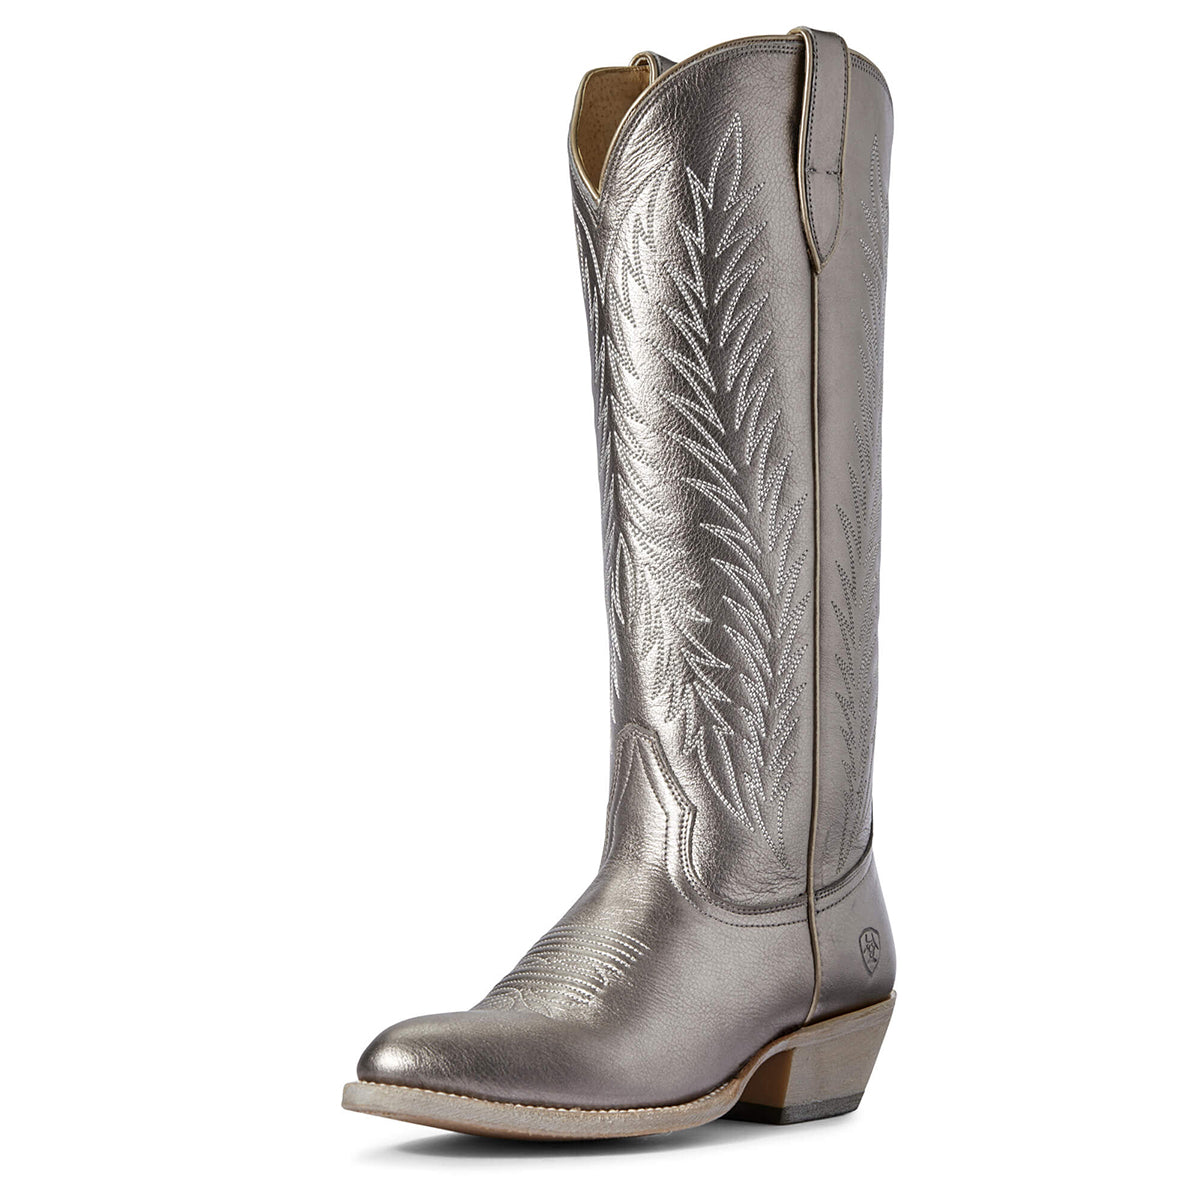 Women's Ariat Legacy Two Step Western Boot in Silver Metallic from the front